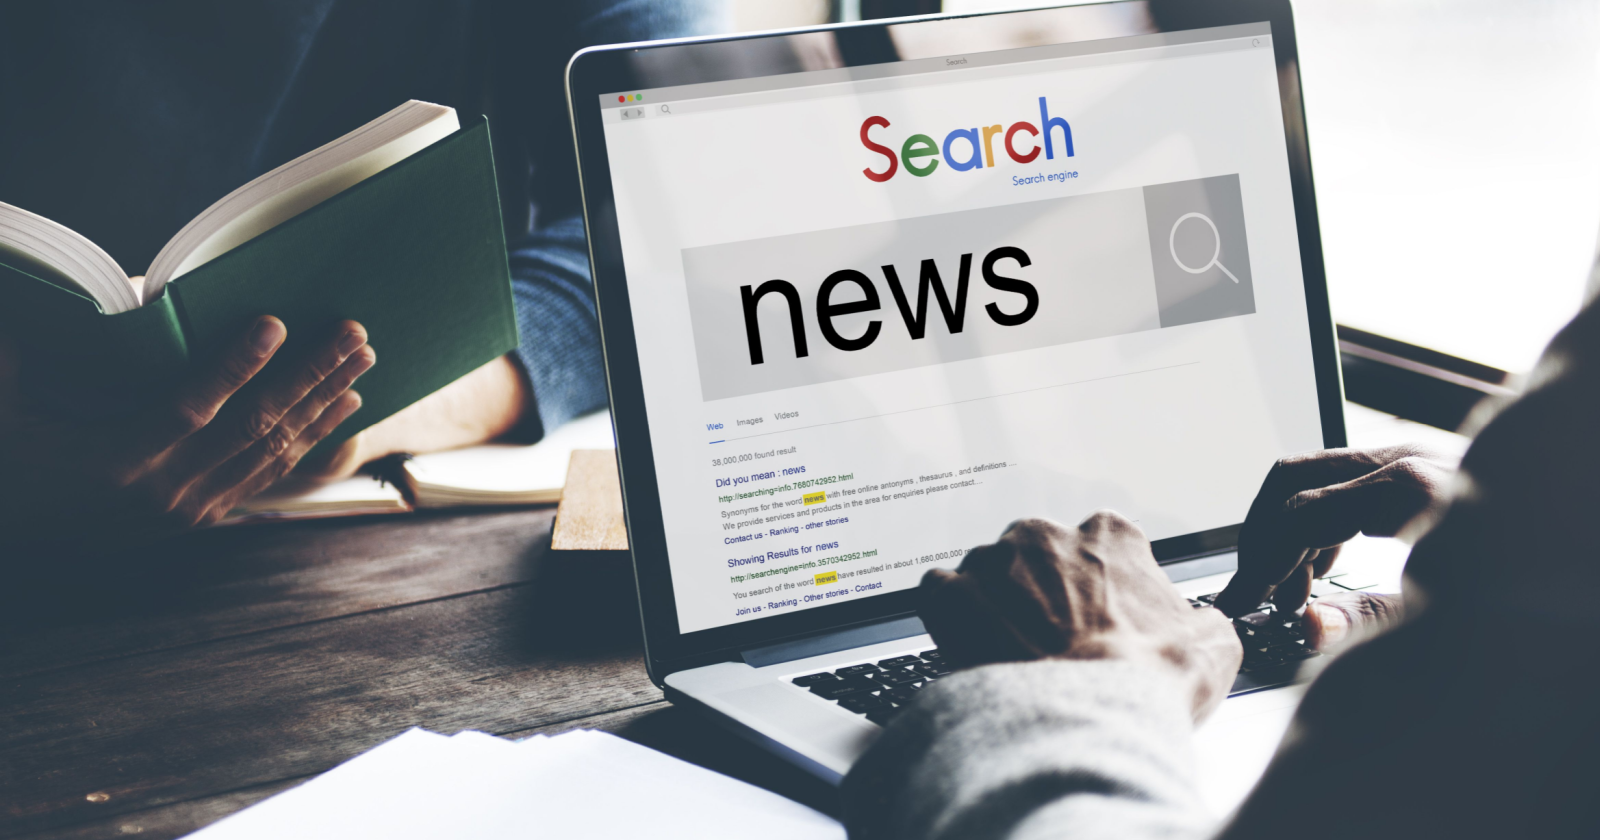 Google SEO Tips For News Articles: Lastmod Tag, Separate Sitemaps via @sejournal, @MattGSouthern